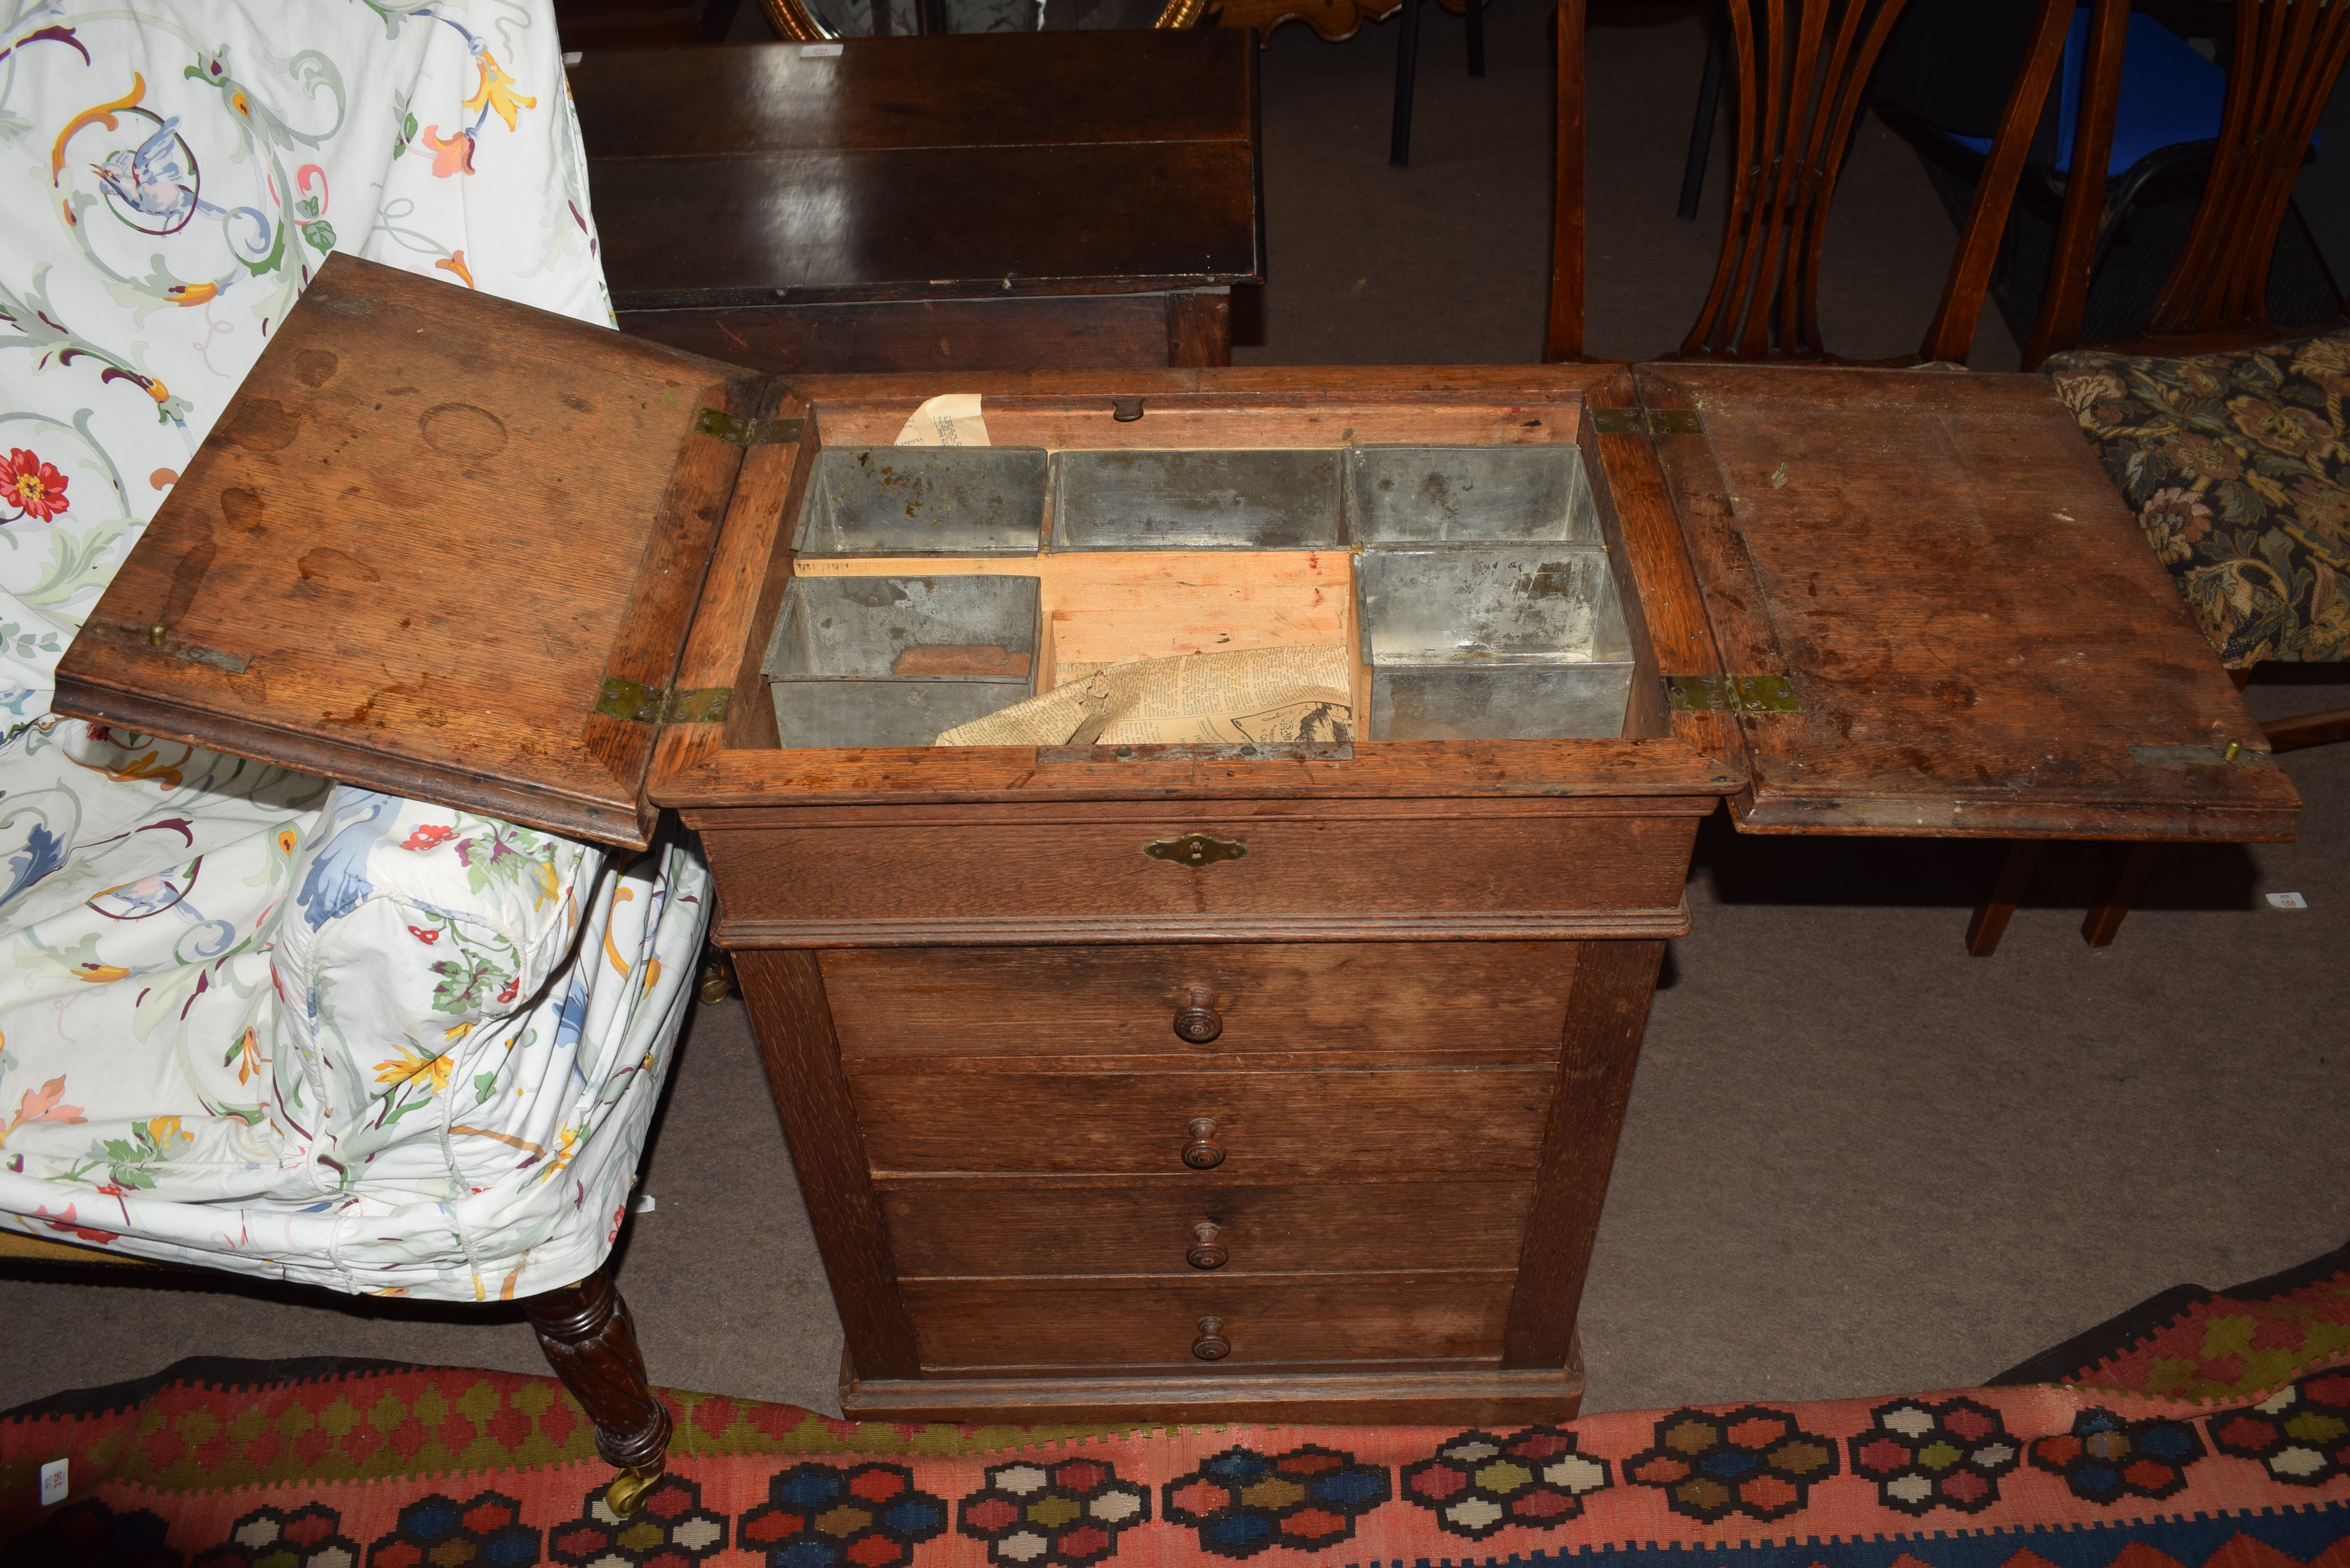 Late 19th century oak shop cabinet with fold-up lid opening to reveal an area containing mixing tub, - Image 2 of 2